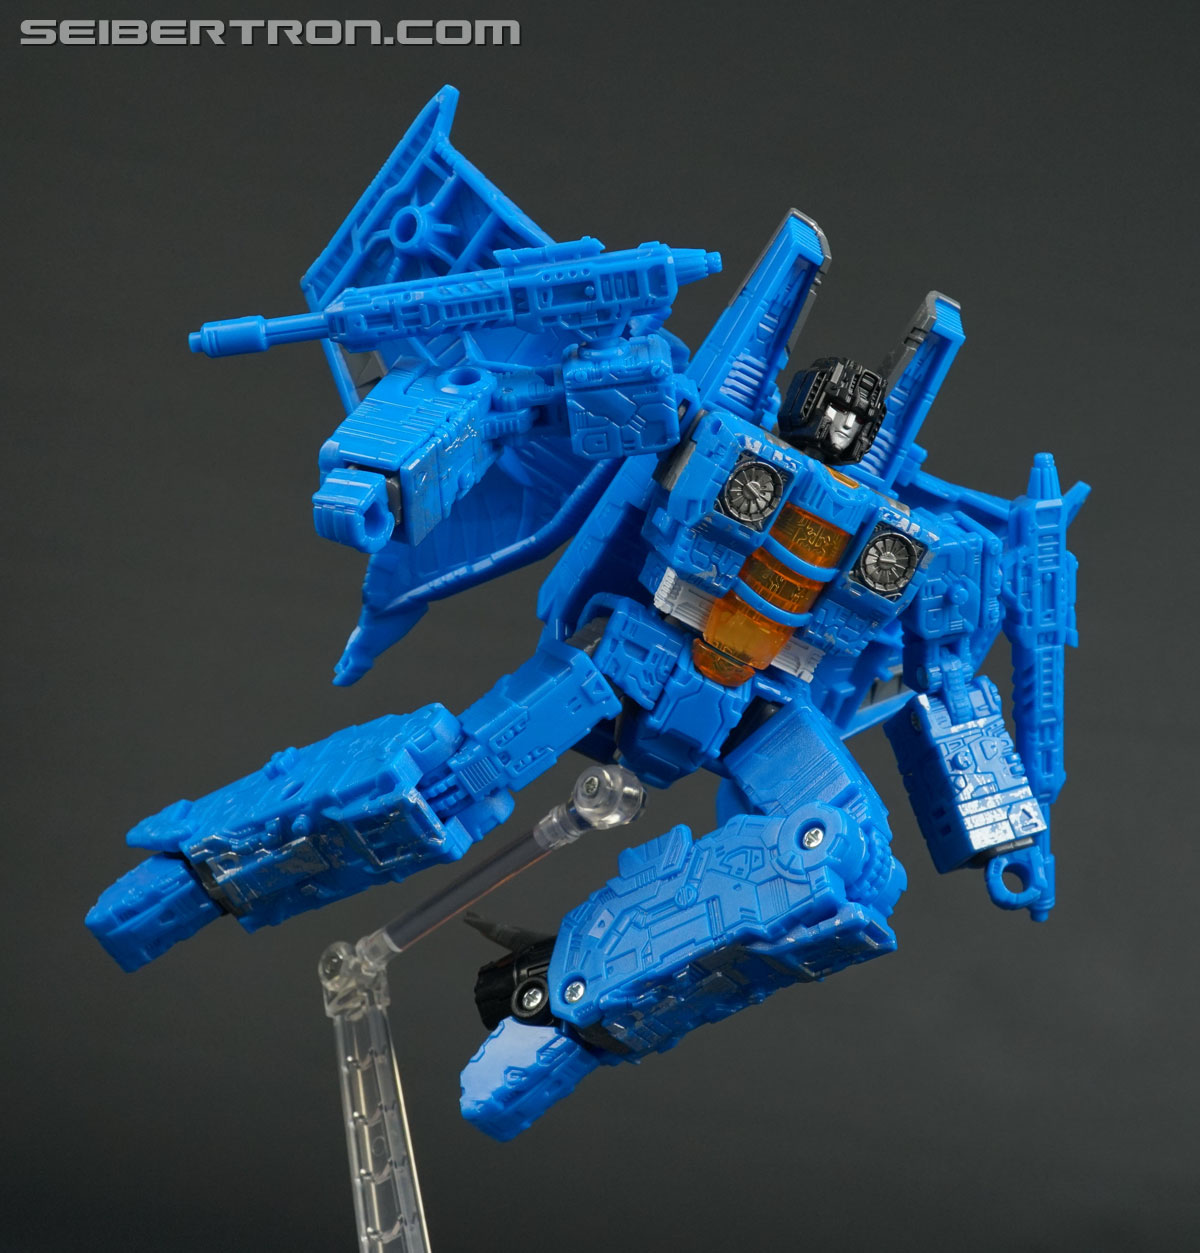 Transformers War for Cybertron: SIEGE Ion Storm (Seeker Ion Storm) (Image #89 of 111)